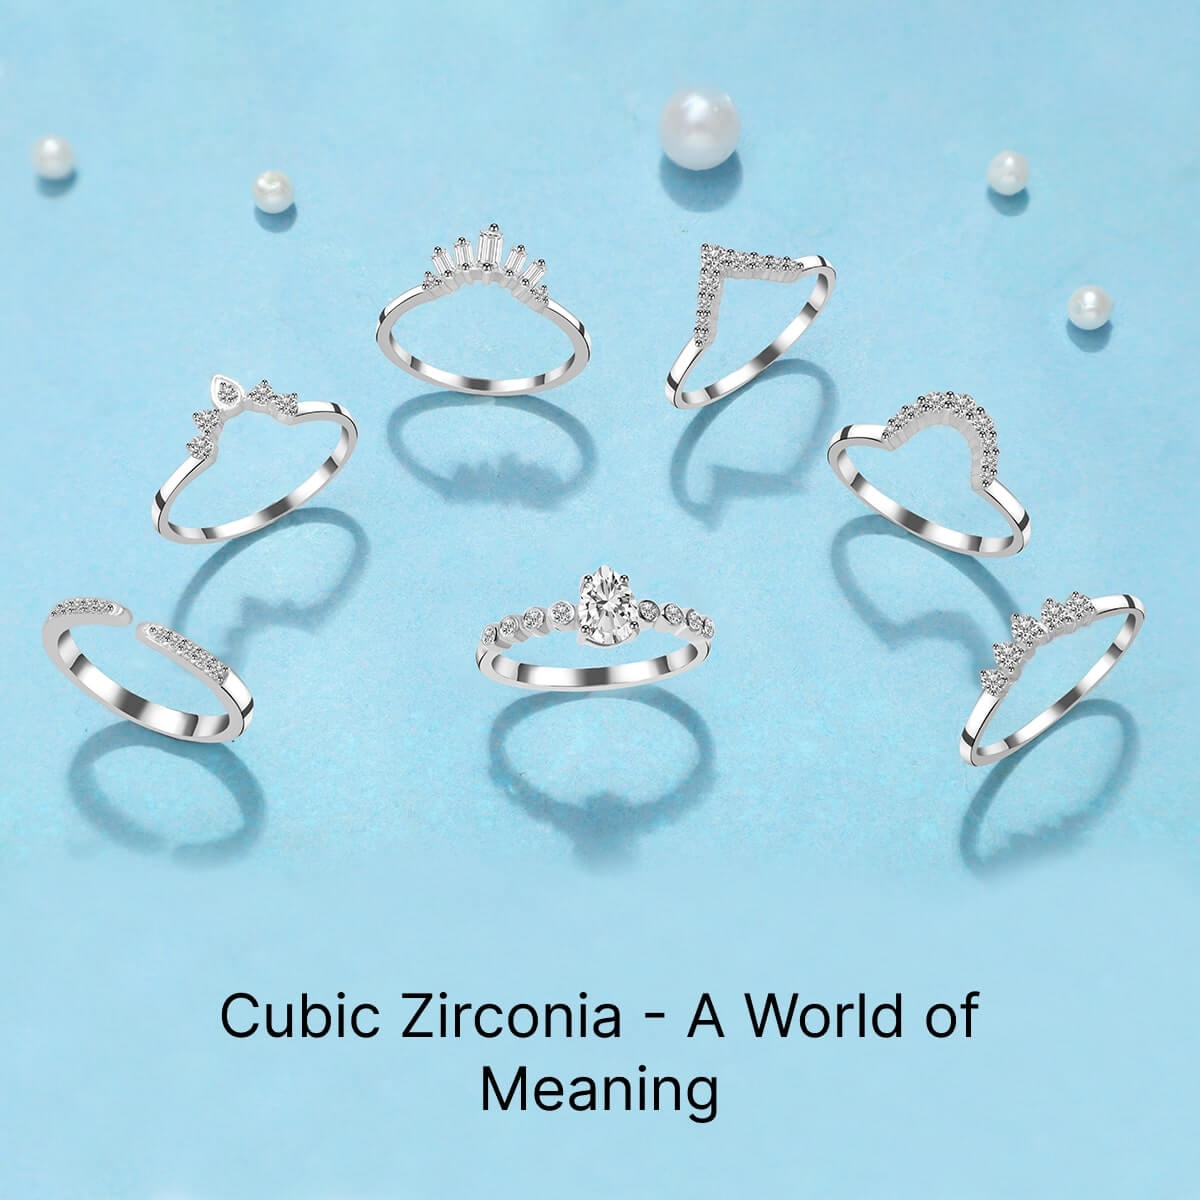 Cubic Zirconia Stone Meaning And Uses